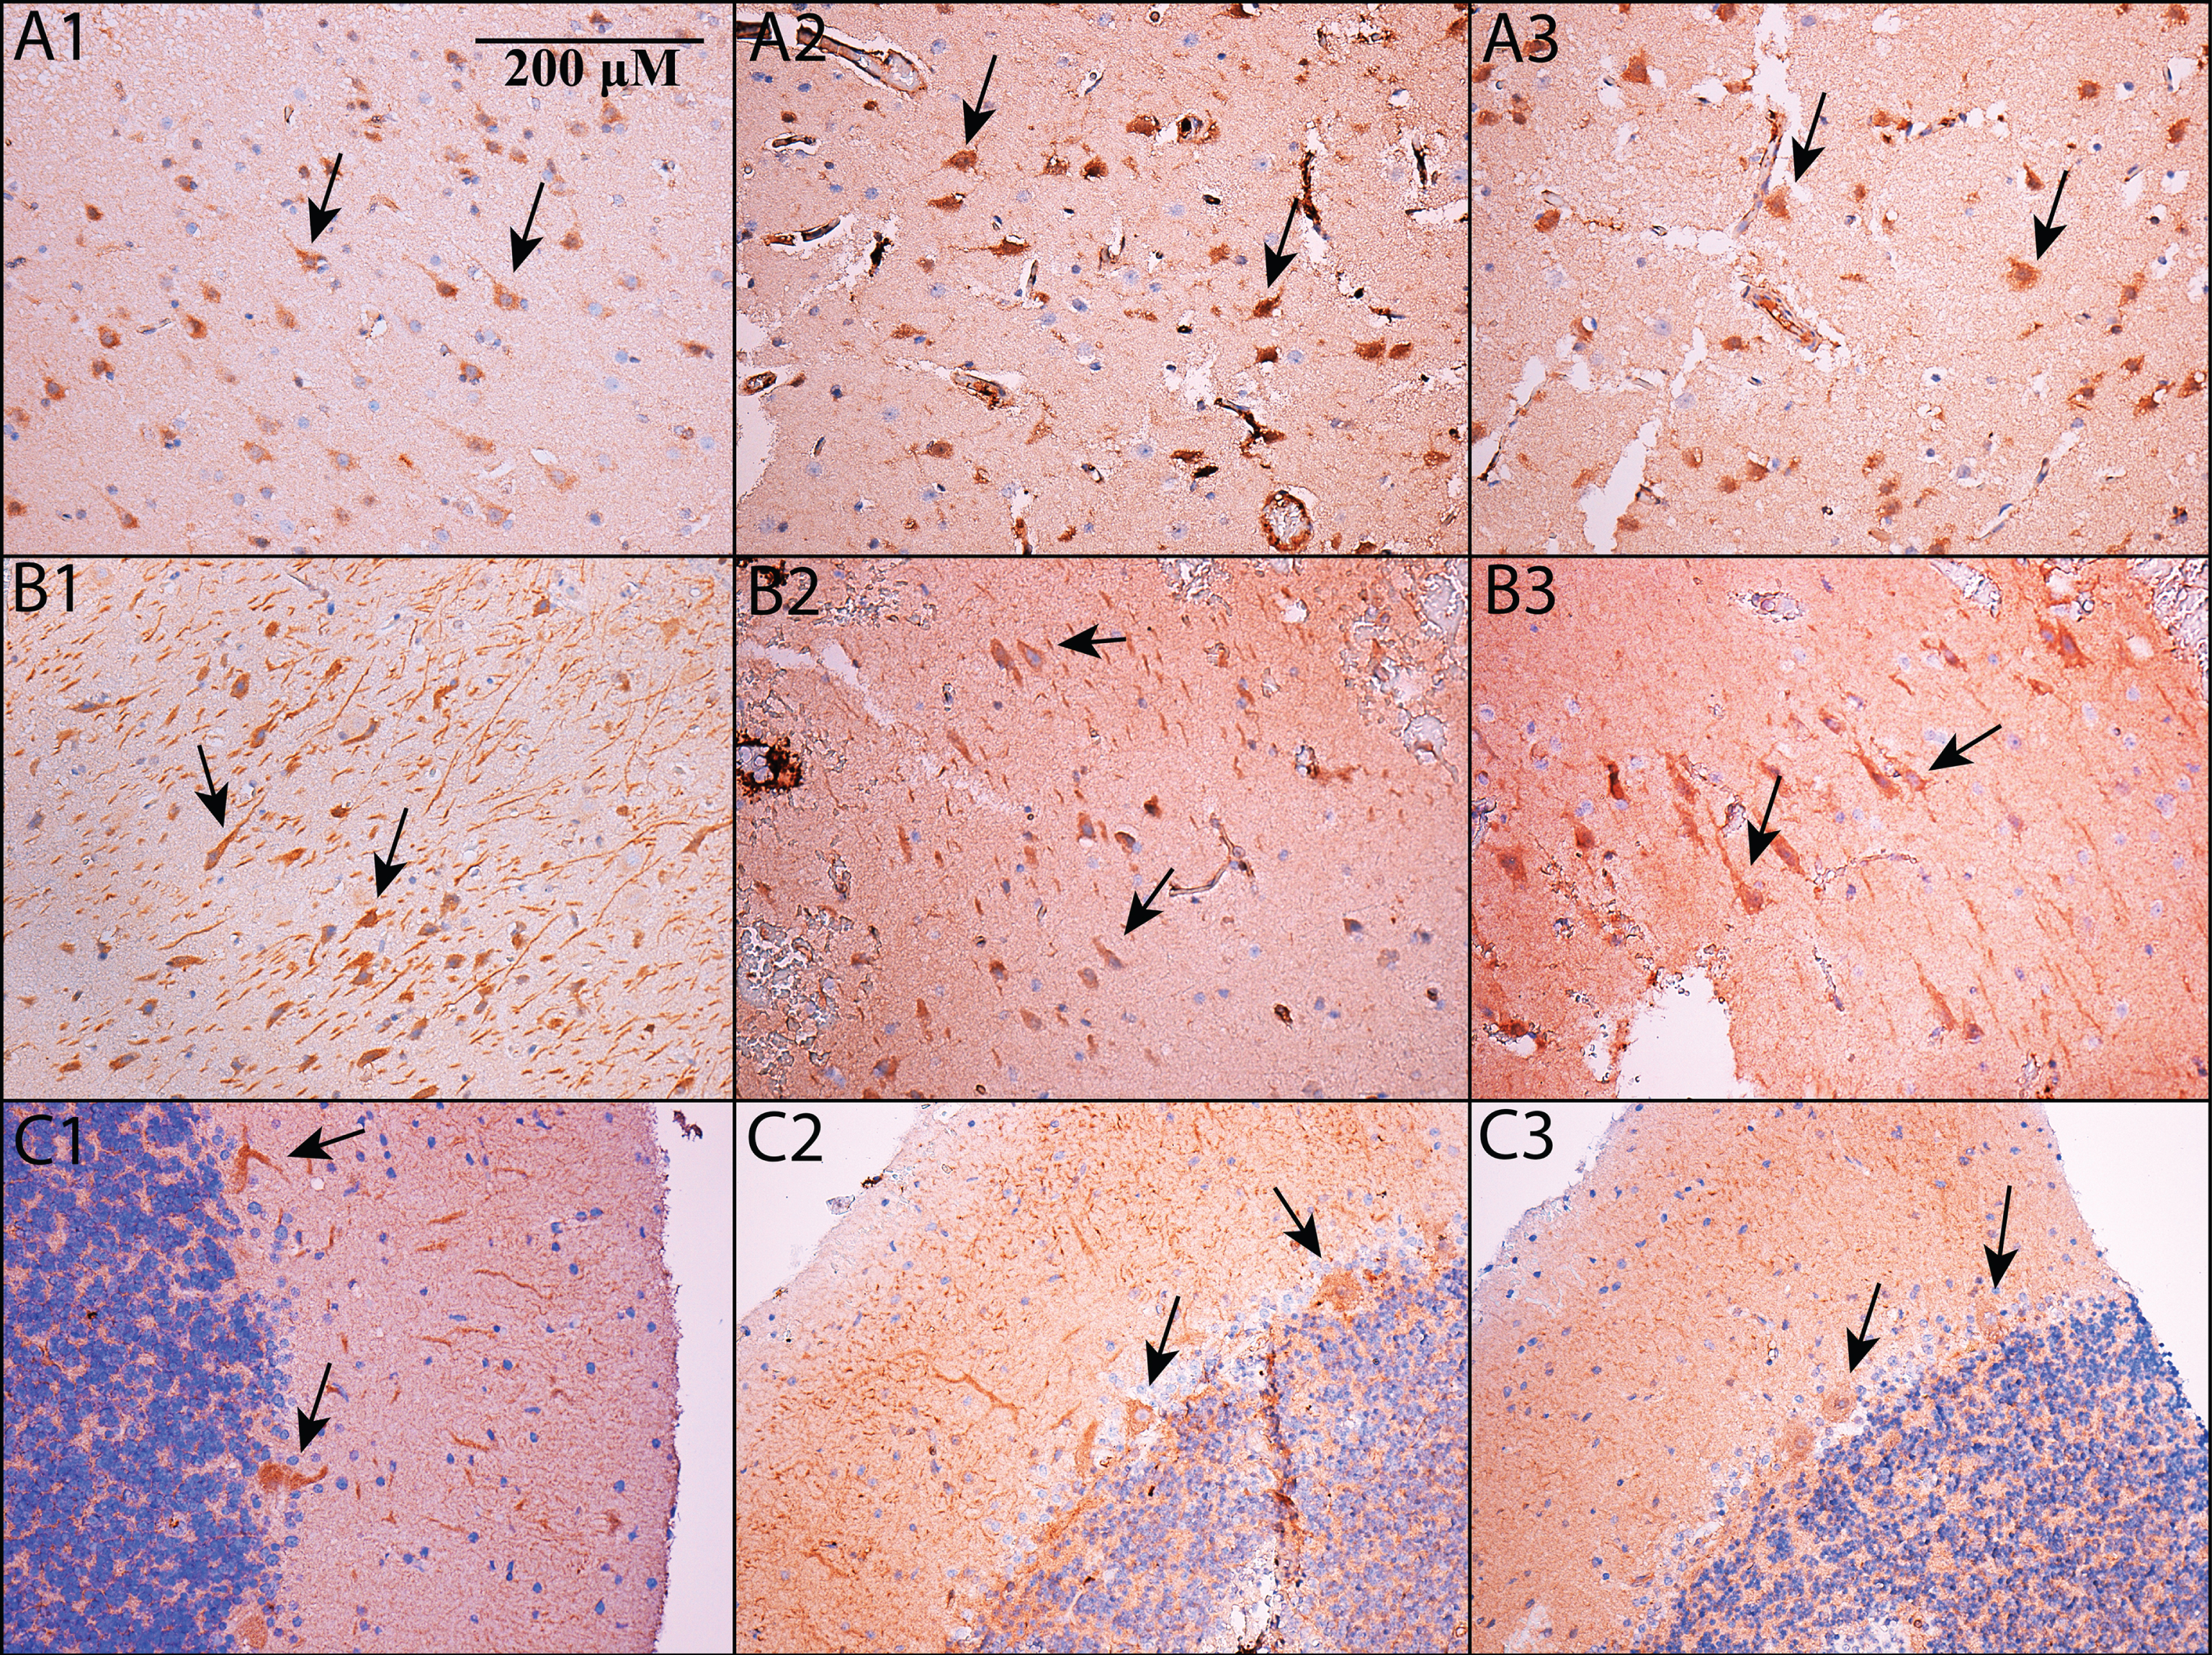 PDE5 is expressed in neurons. Immunohistochemistry was performed on formalin-fixed, paraffin embedded sections of cortex (A1-A3), hippocampus (B1-B3; shown is subfield CA2/3 – see main text for details) and cerebellum (C1-C3). All images are shown at 200x magnification; the scale bar in Panel A1 applies to all panels. Panels A1, B1, and C1 use an Abcam antibody, panels A2, B2, and C2 use a Santa Cruz antibody, and panels A3, B3, and C3 use an Atlas antibody (see Methods). In all cases, PDE5 is expressed in the cytoplasm of neurons. In cortex and hippocampus, PDE5 is expressed primarily in large, pyramidal-type neurons (see arrows), whereas in cerebellum, it is prominent in Purkinje neurons (see arrows).